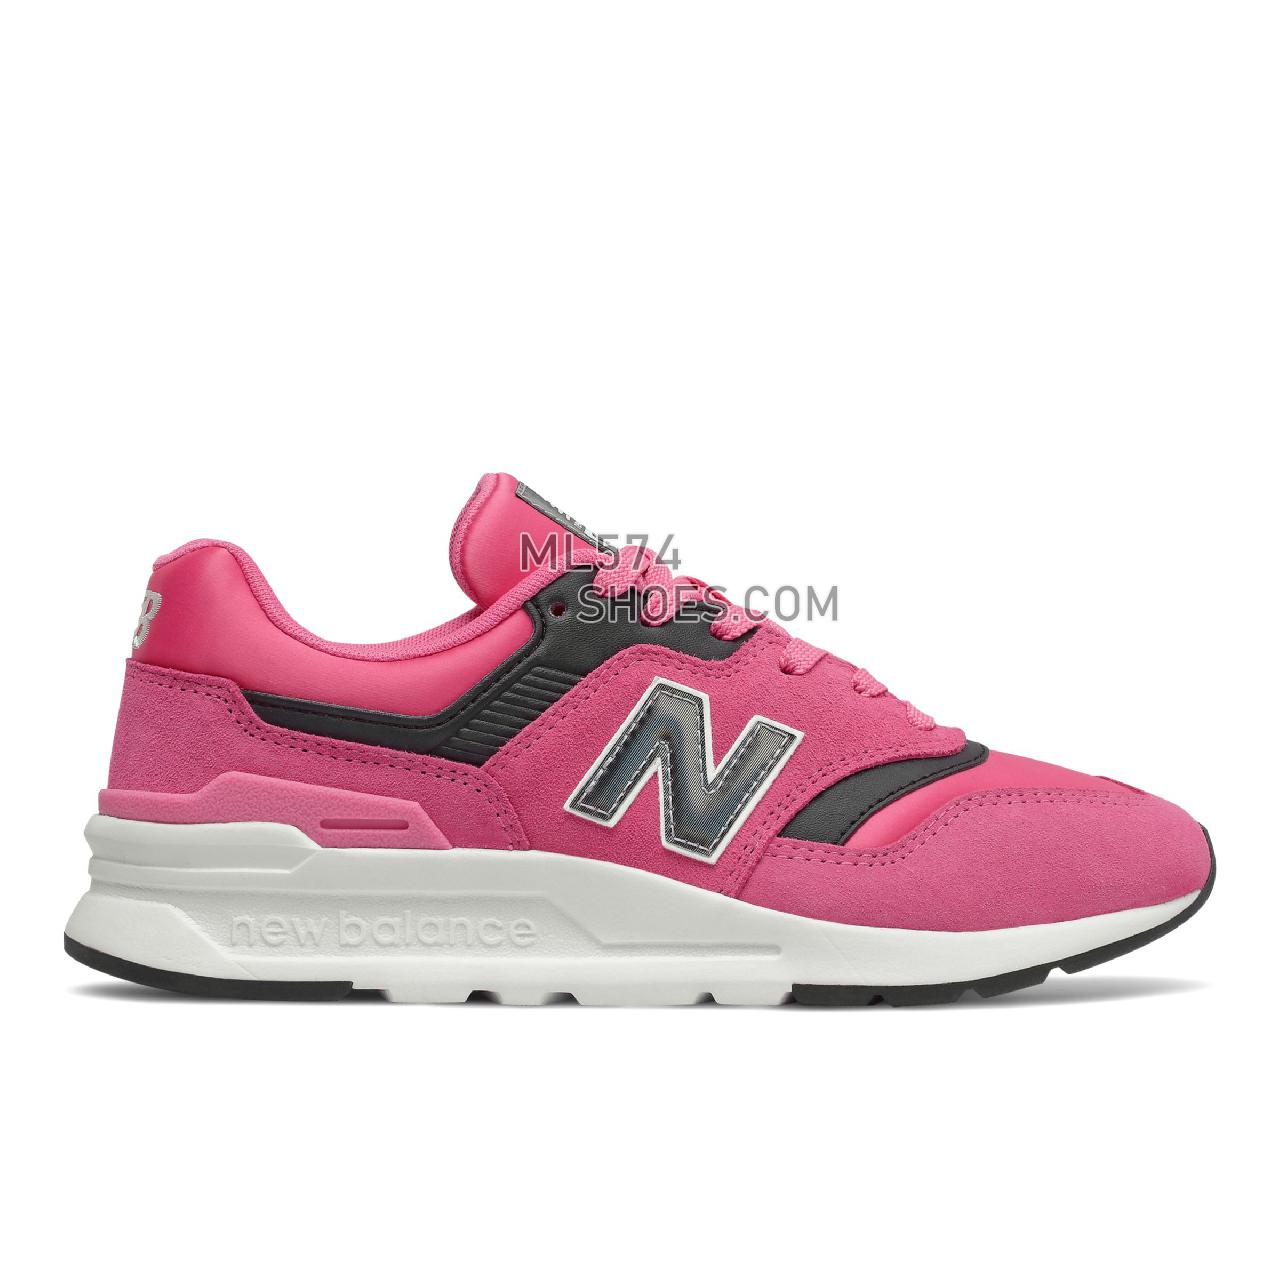 New Balance 997H - Women's Classic Sneakers - Sporty Pink with Black - CW997HLL